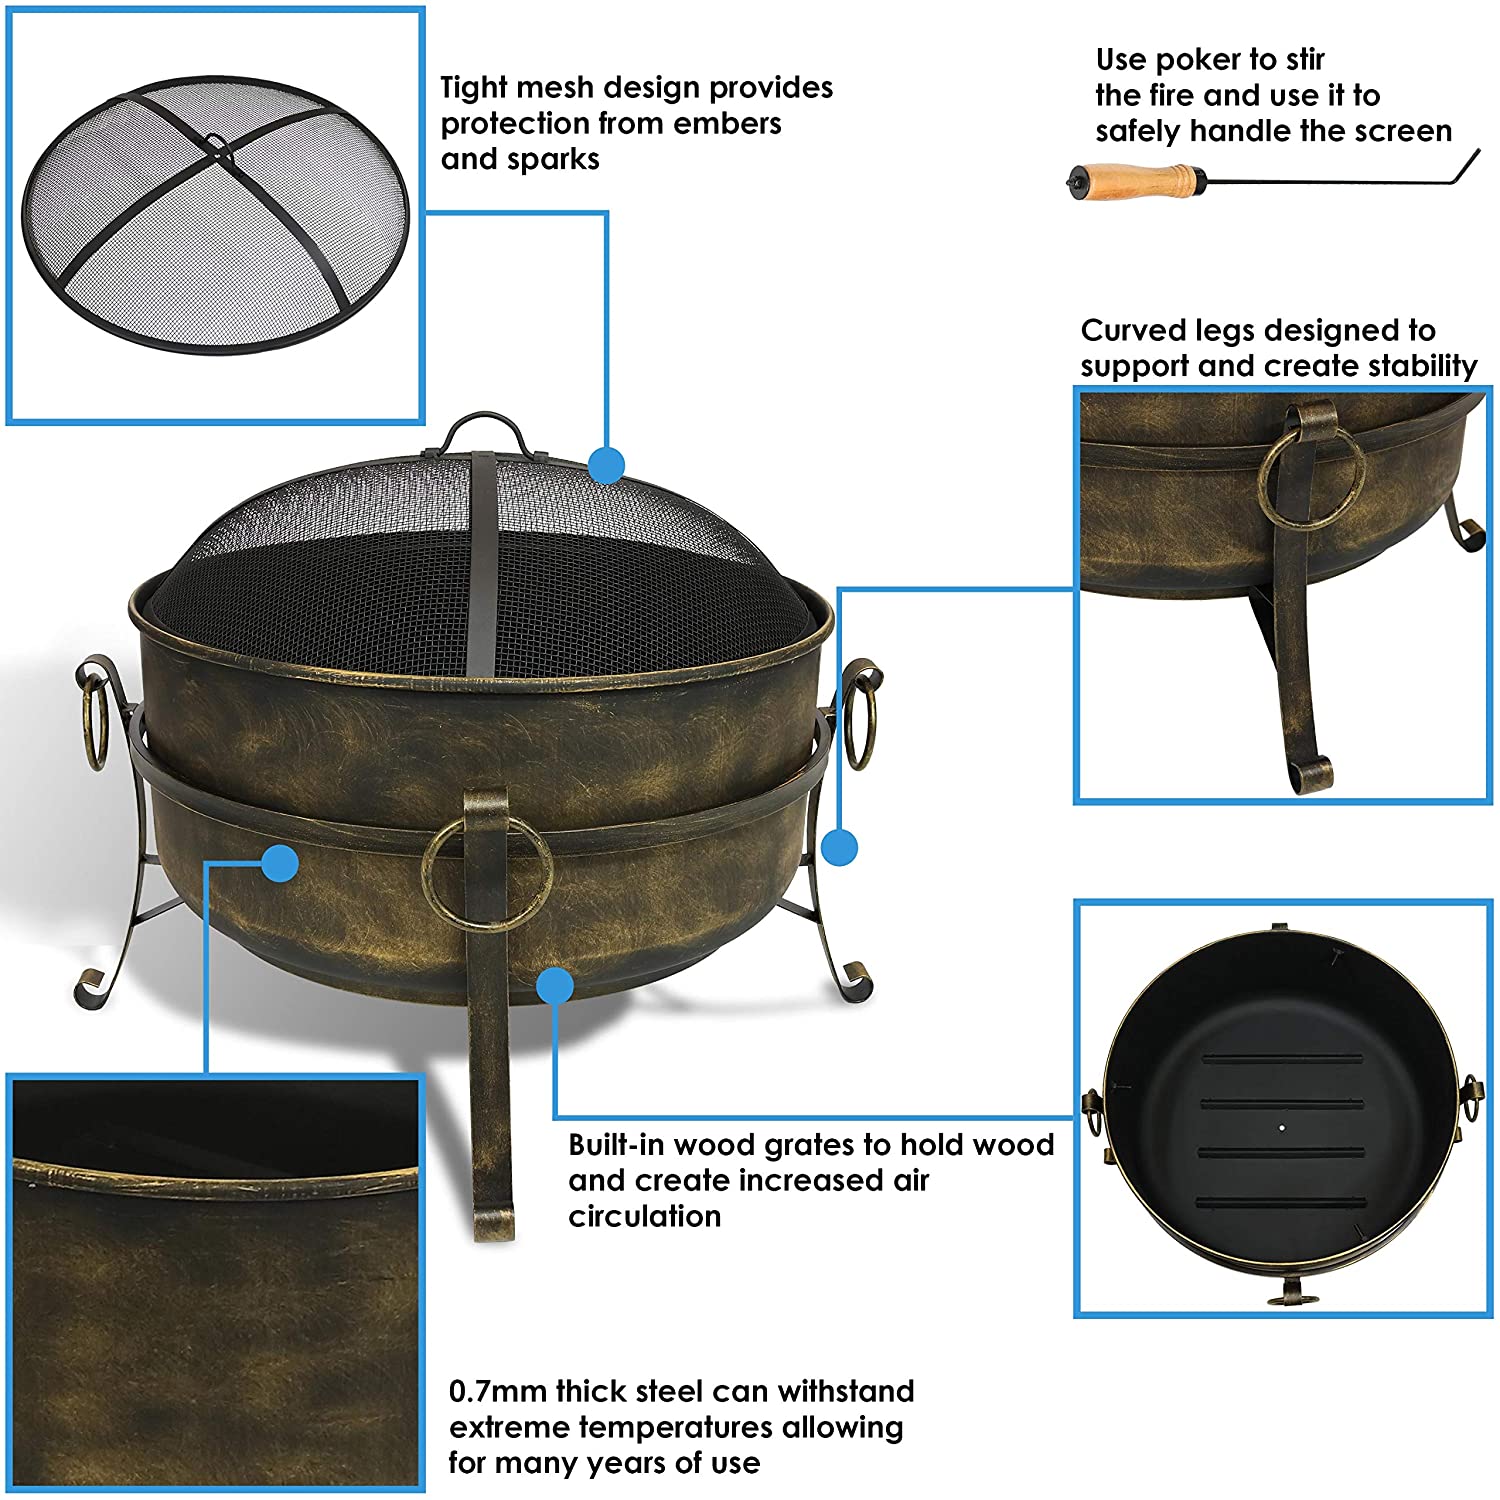 Wood Burning 34" Fire Pit Cauldron for Outdoor Use, w/ Poker, Round Screen and Metal Grate